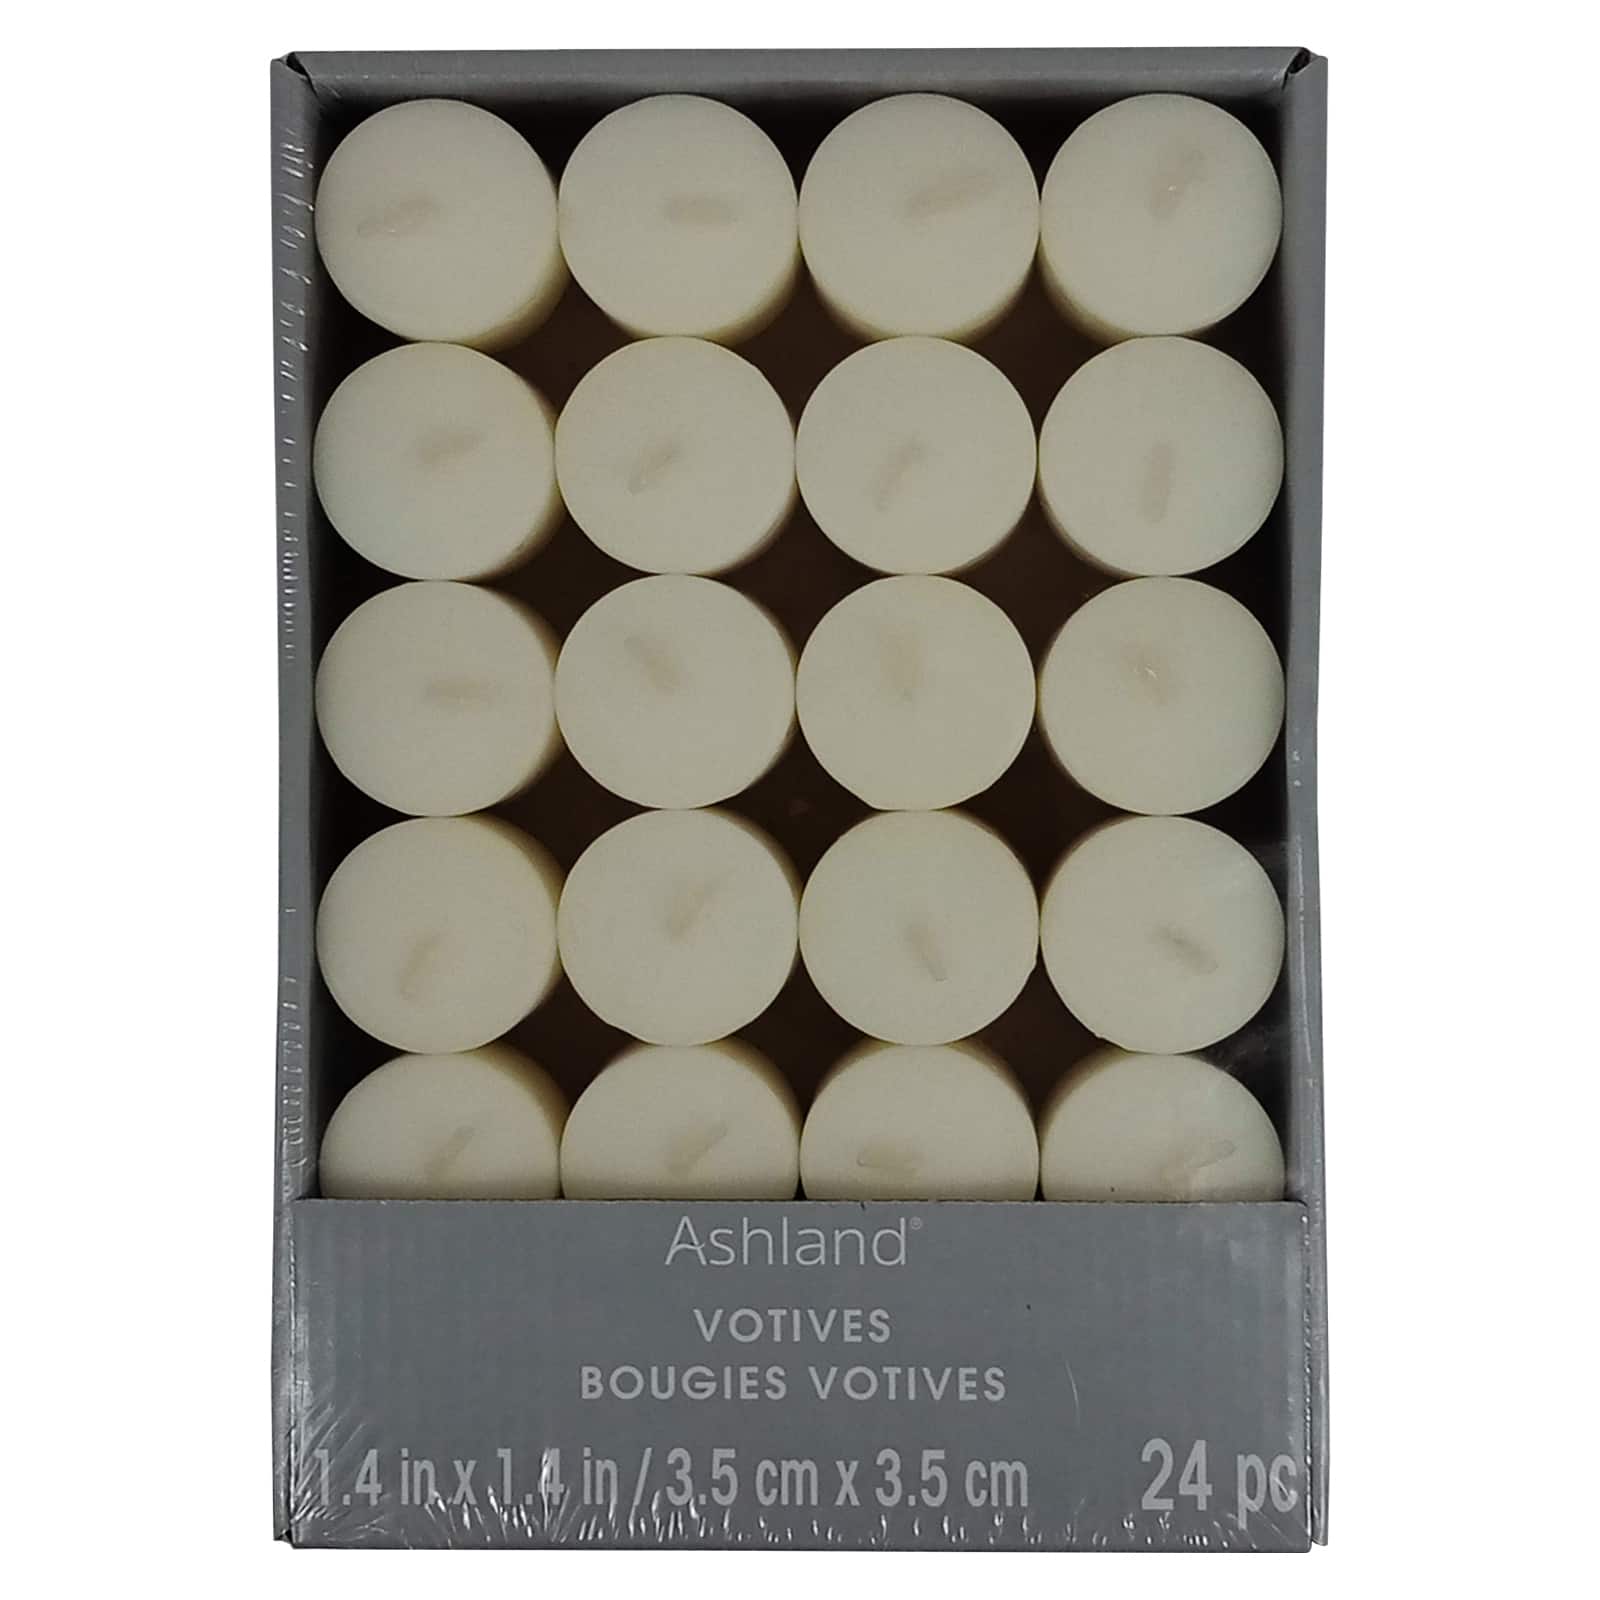 12 Packs: 3 ct. (36 total) Basic Elements™ White Pillar Candles by